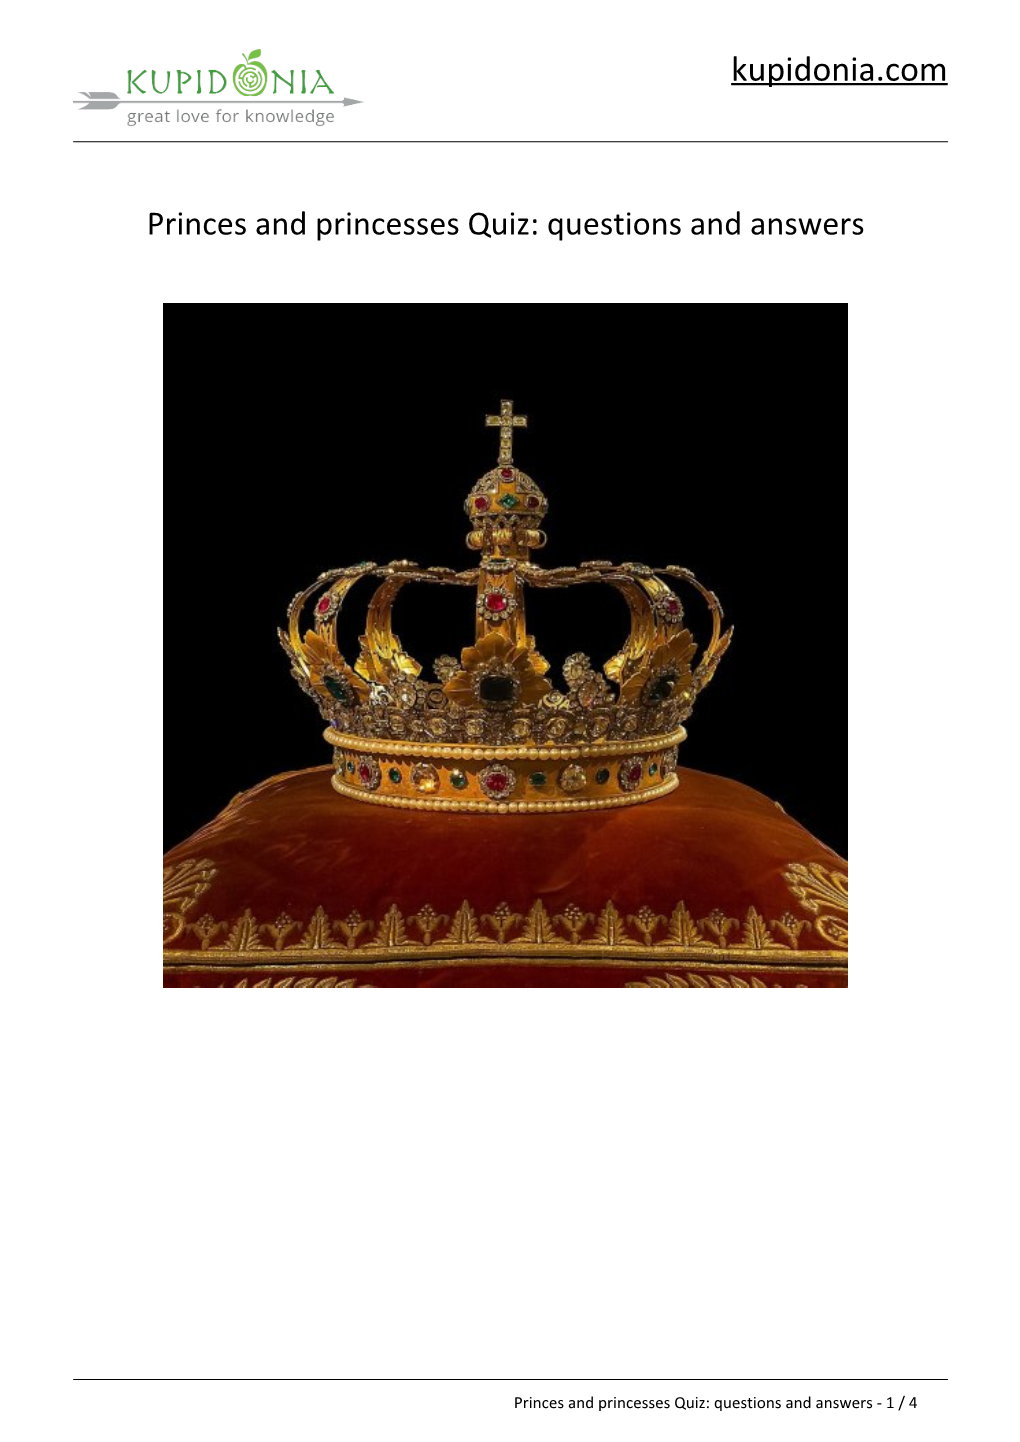 Princes and Princesses Quiz: Questions and Answers